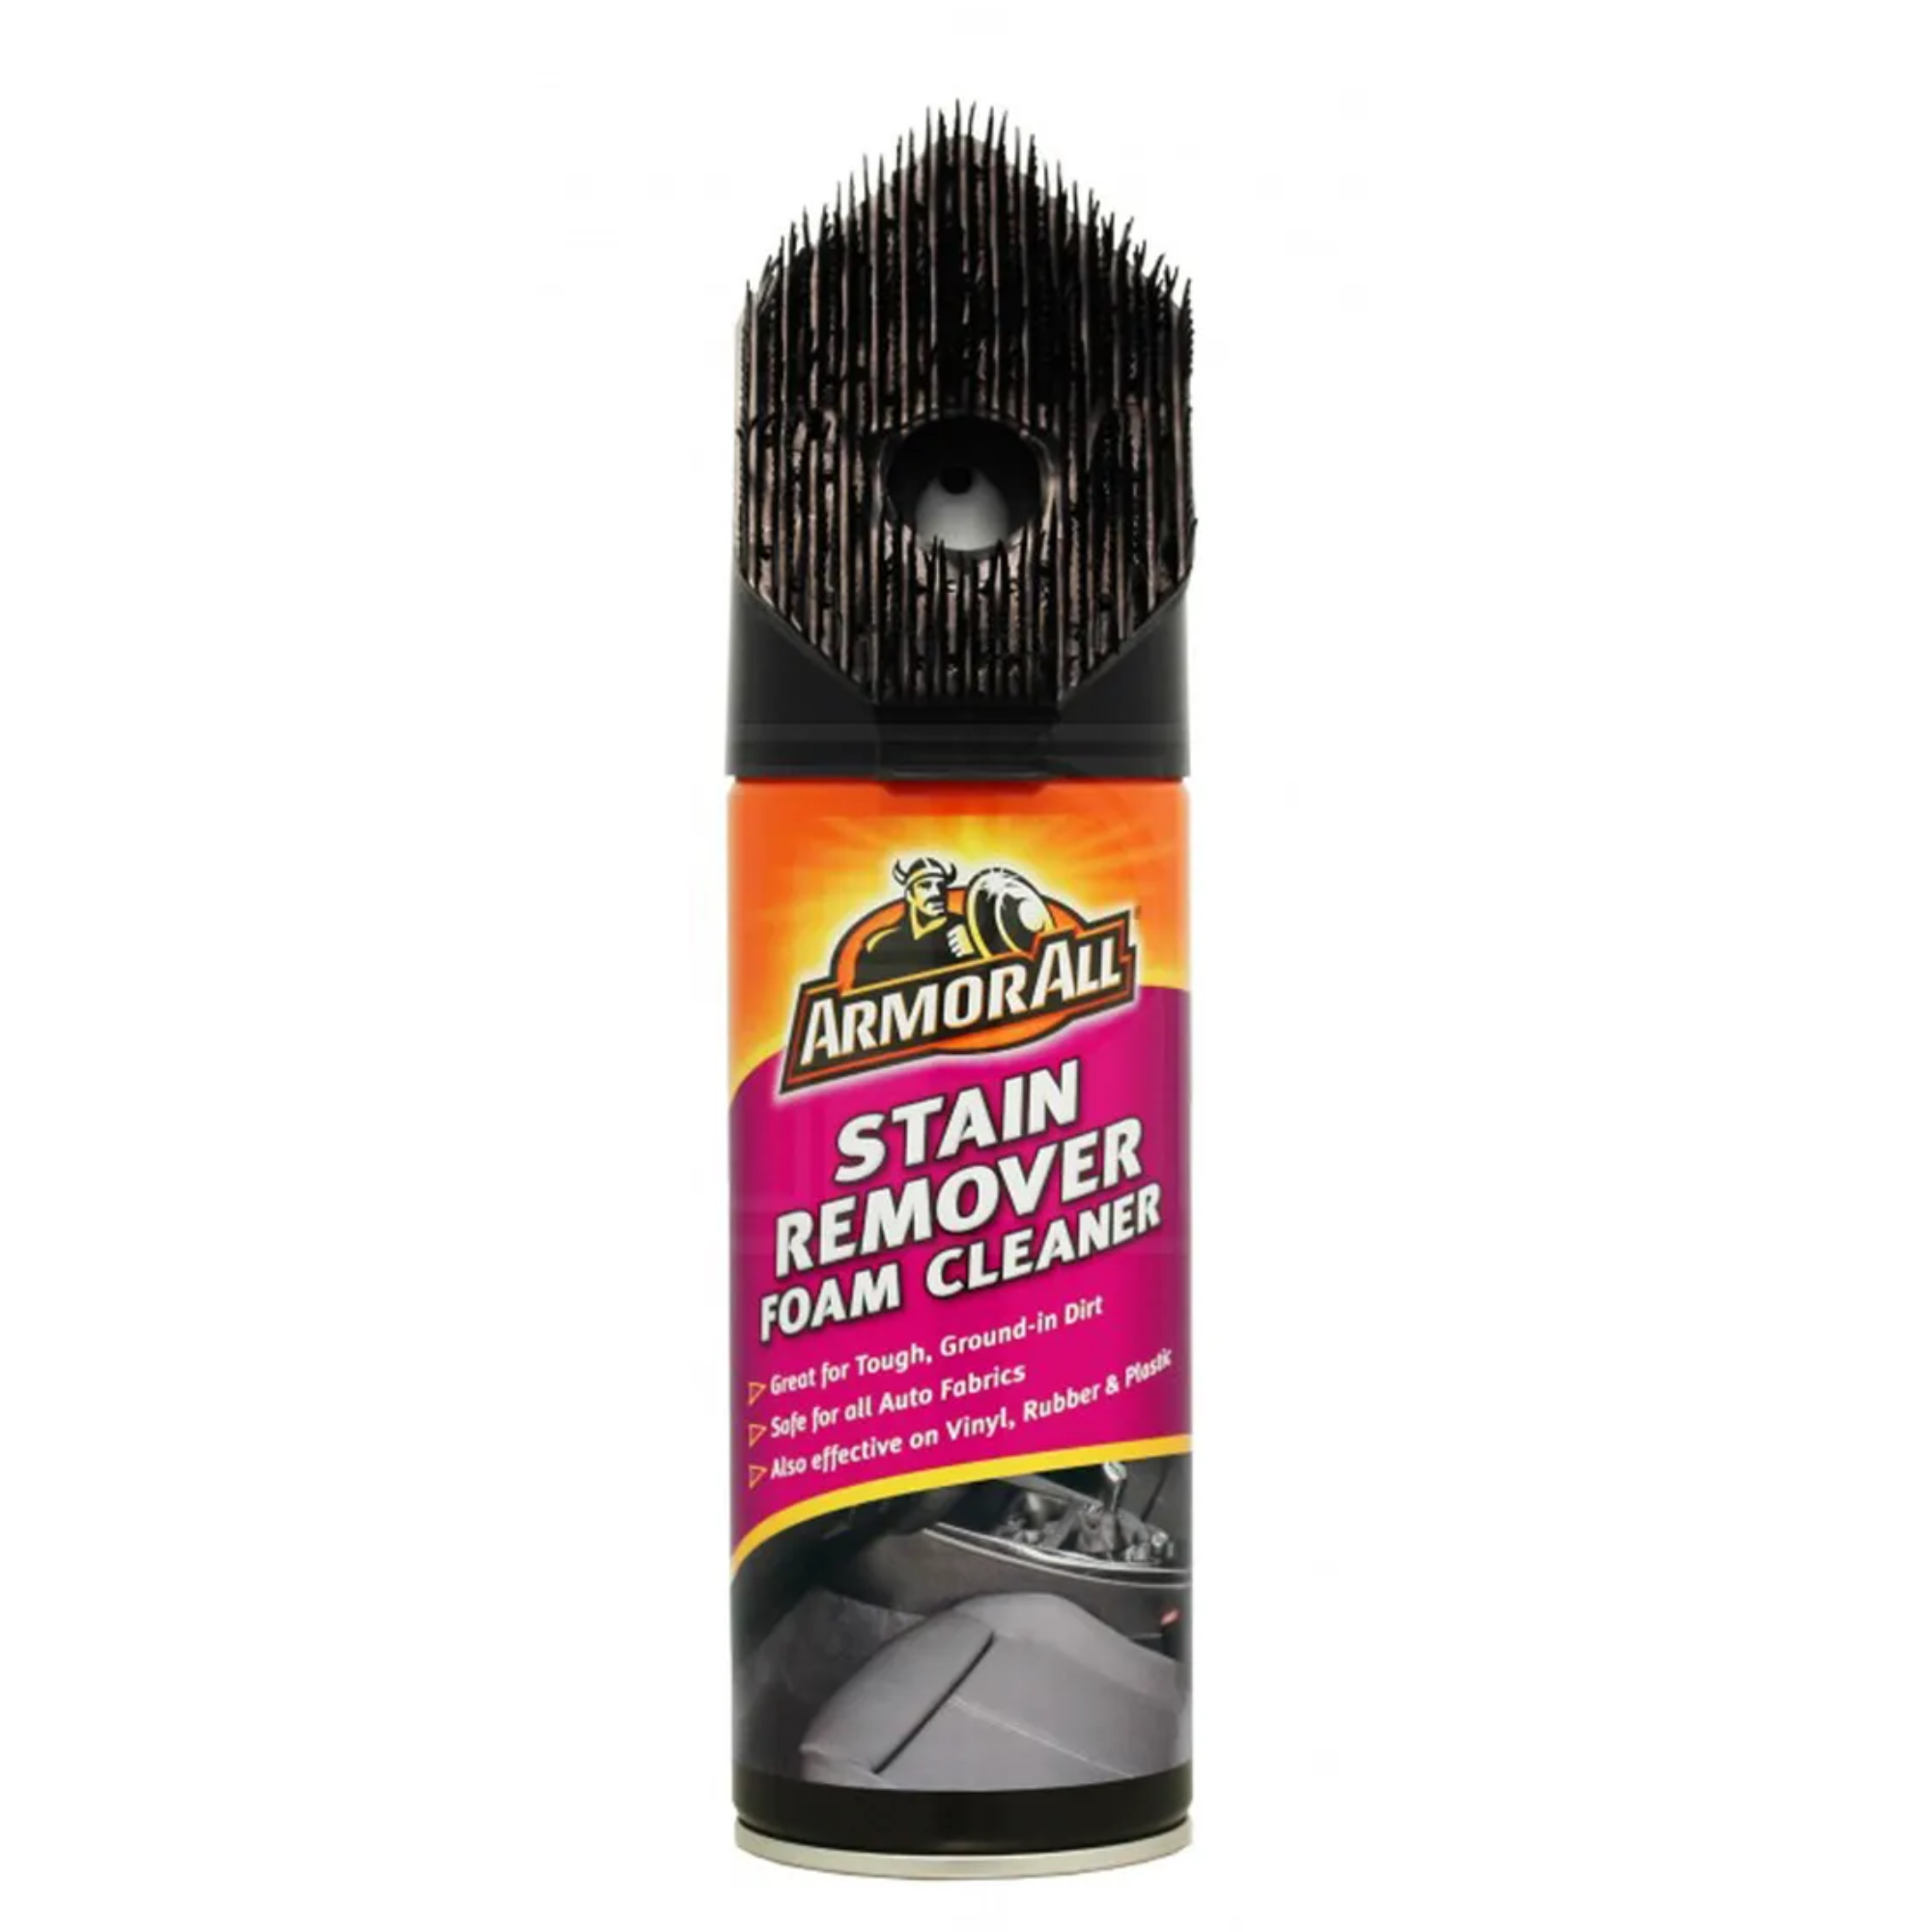 ArmorAll 400ml Stain Remover Foam Cleaner + Brush